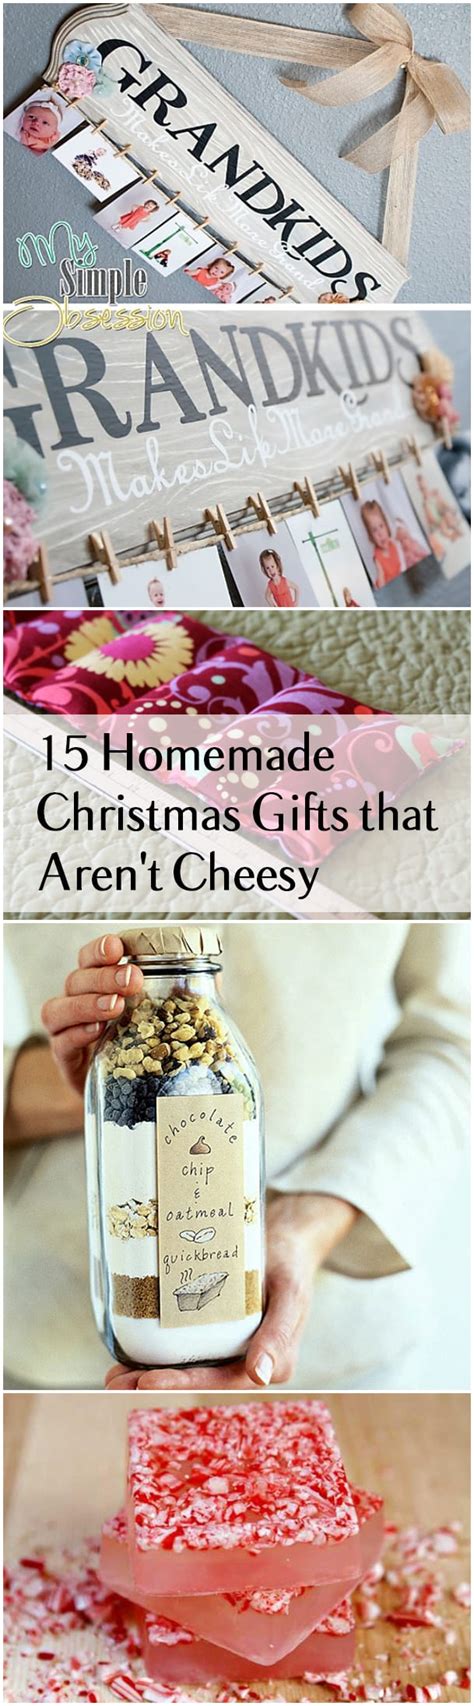 Mom gifts for christmas diy. 15 Homemade Christmas Gifts that Aren't Cheesy